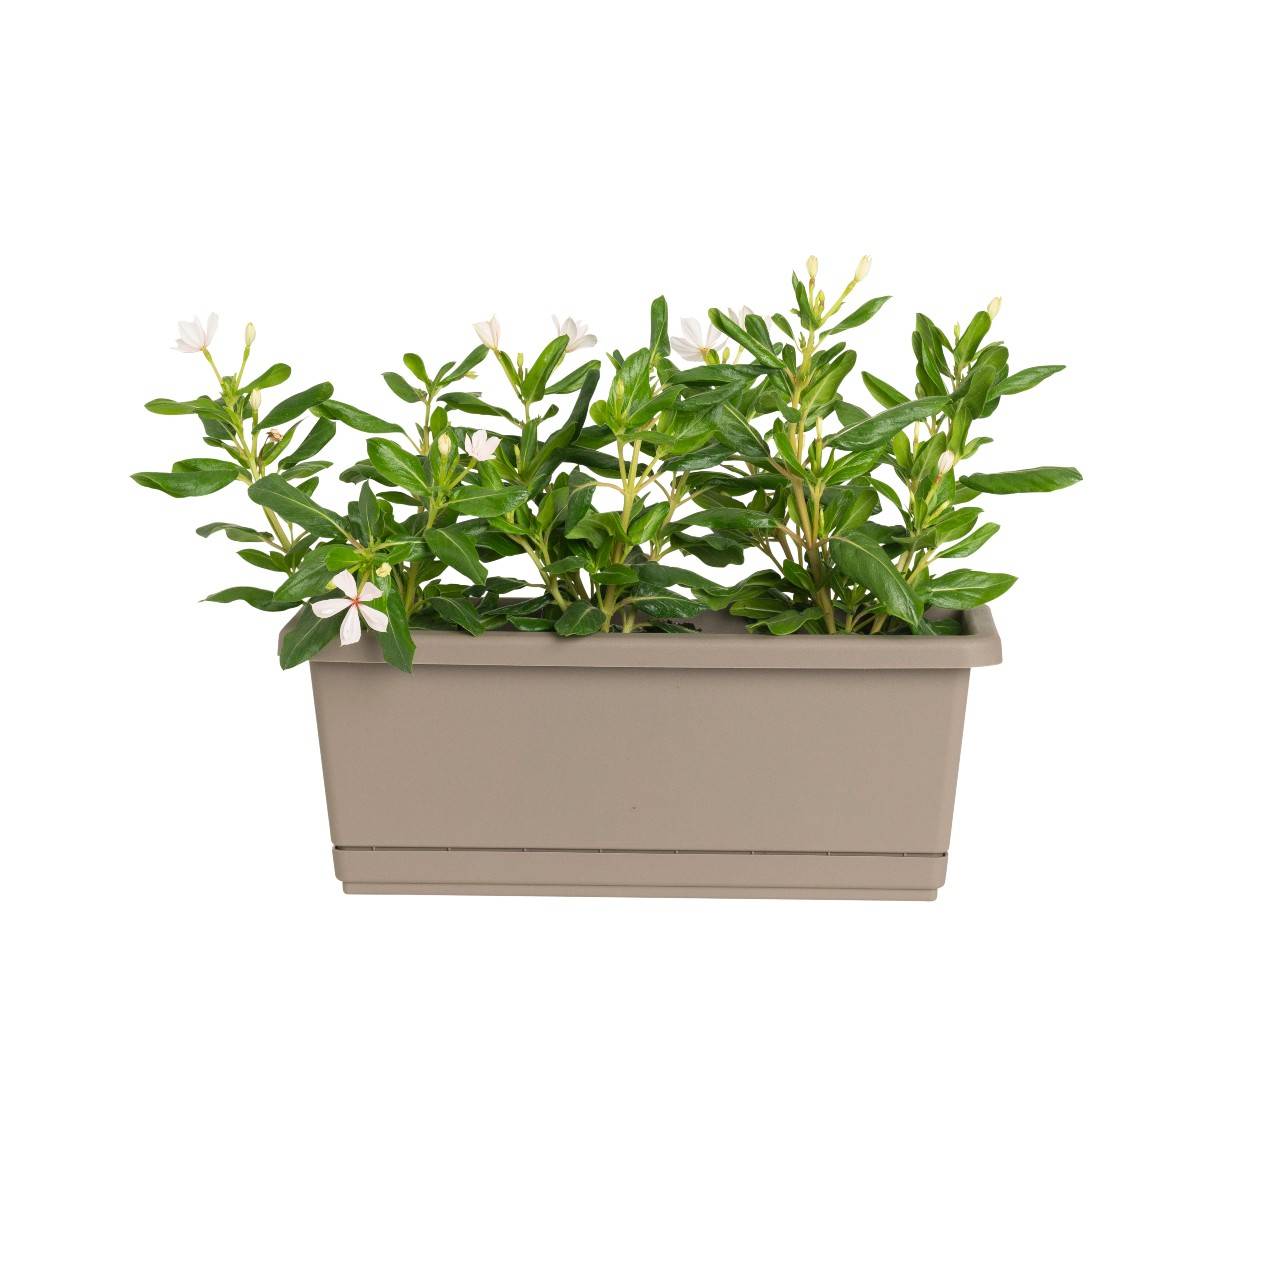 Flowers in a taupe colored windowsill planter